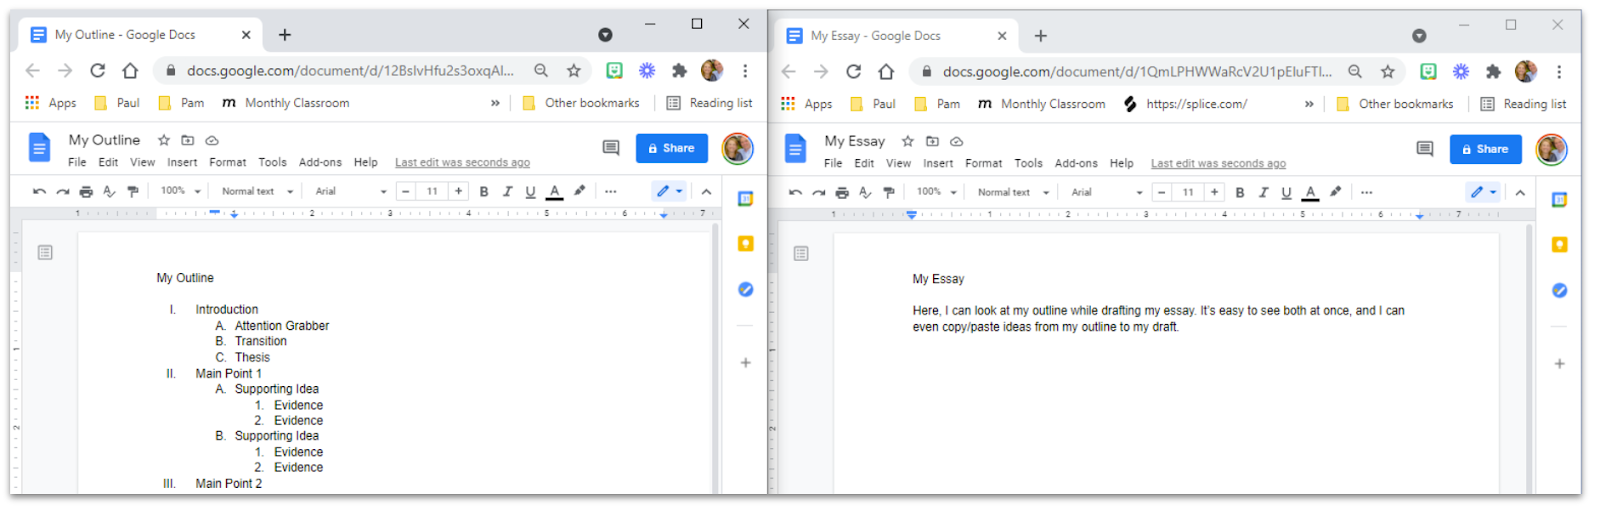 Image of a split screen showing an outline and an essay in Google Docs